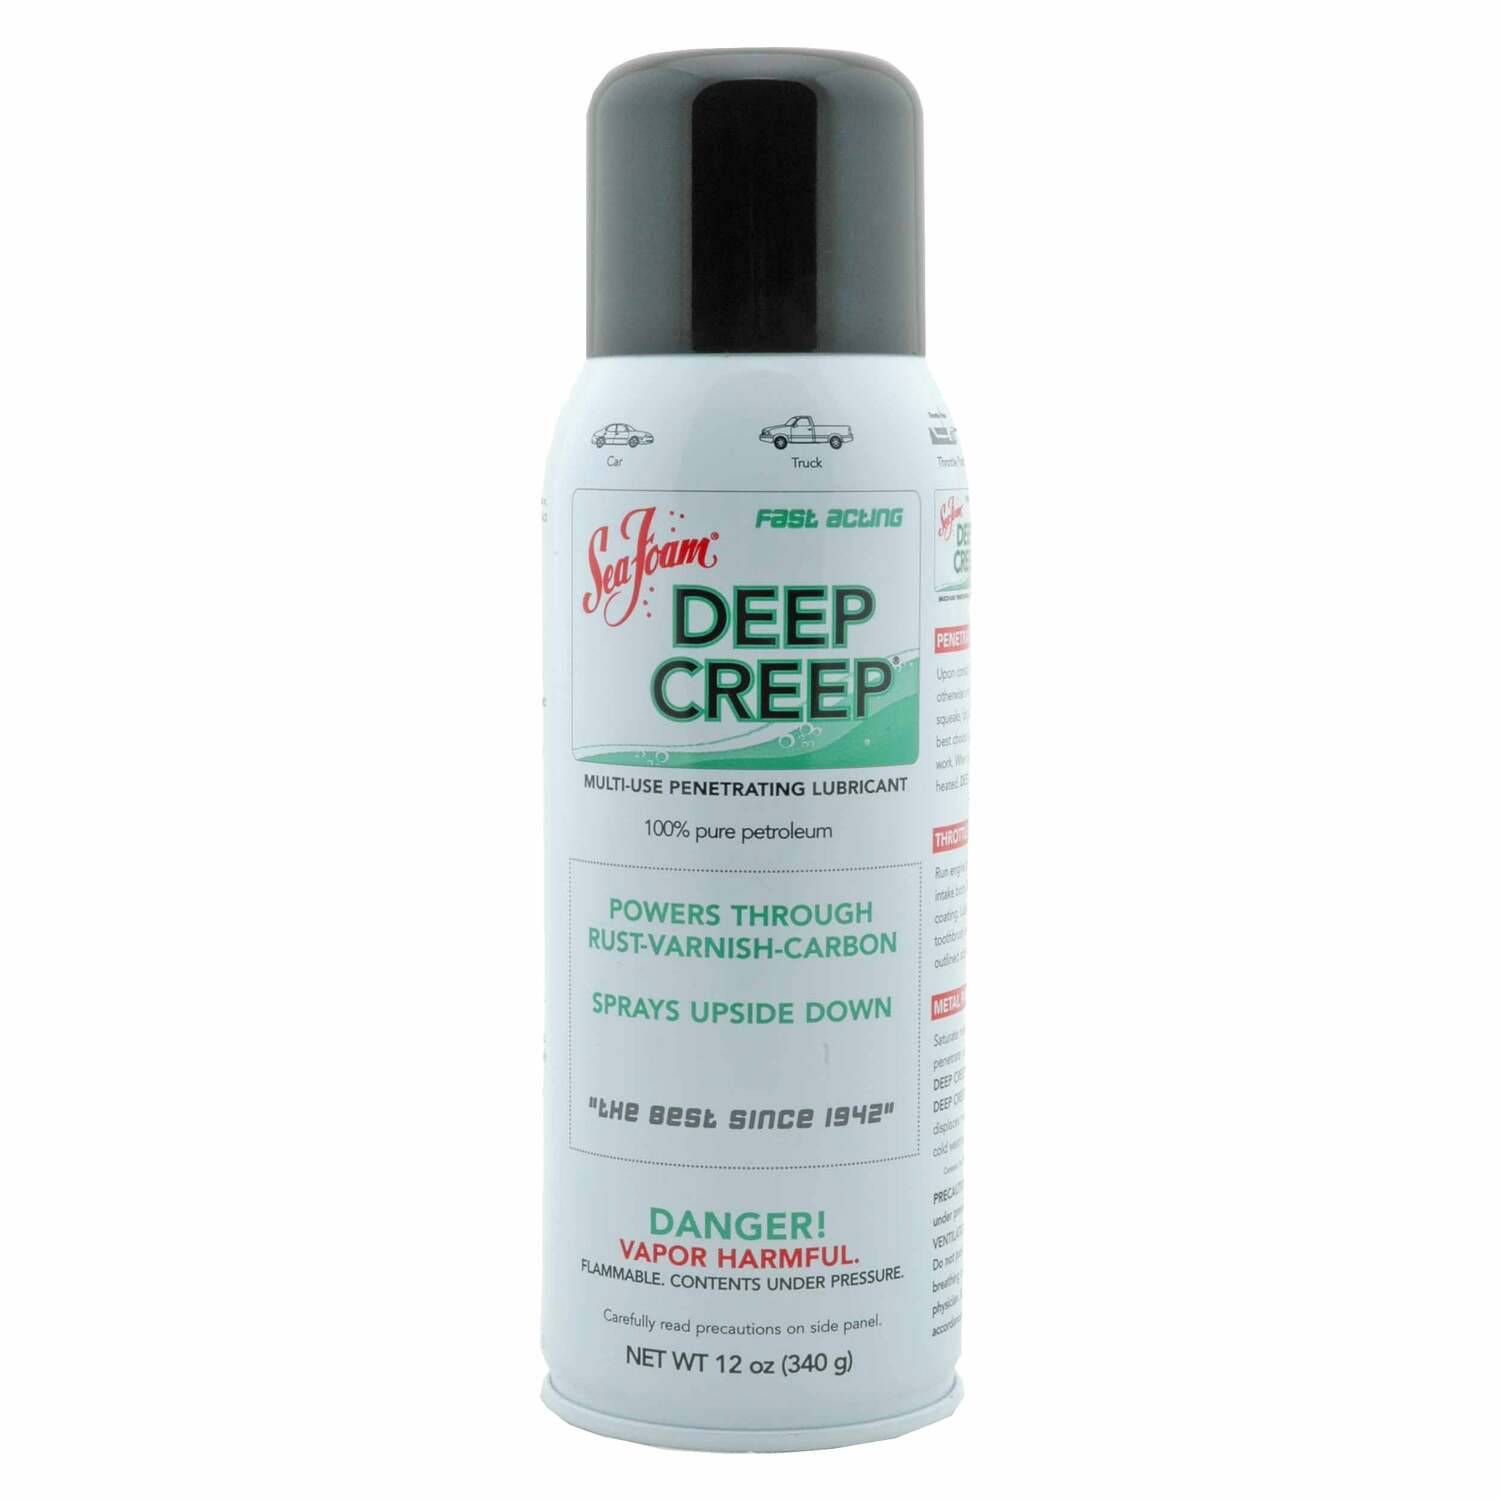 Sea Foam Deep Creep; penetrating oil and lubricant, frees rusted parts and  lubricates equipment, 12 oz. DC14 - Advance Auto Parts